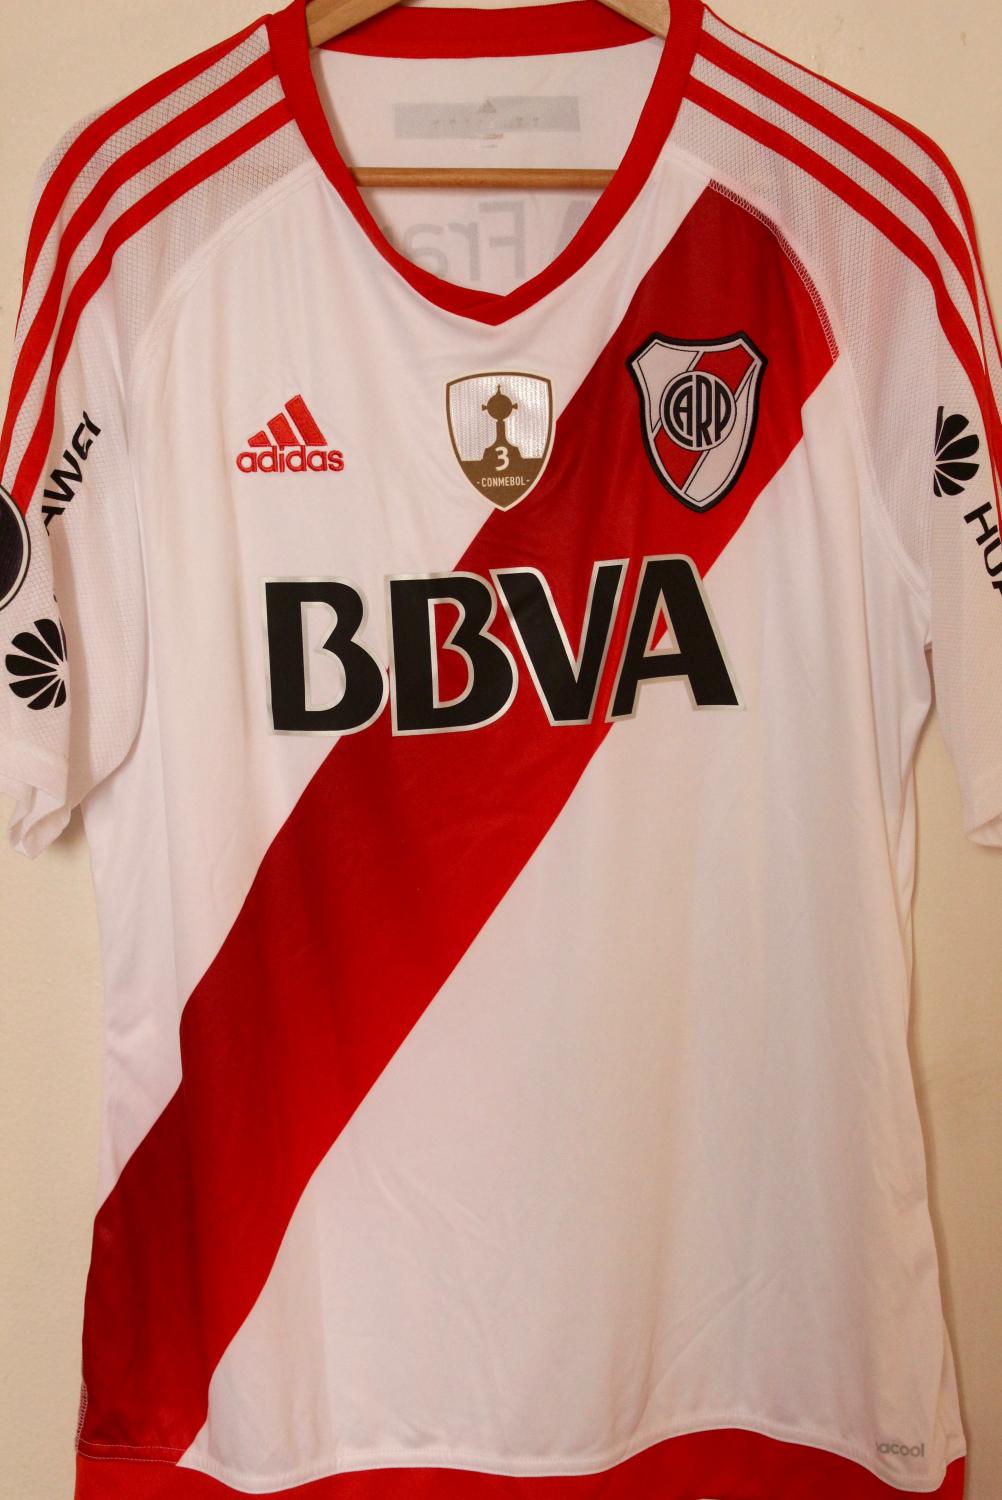 RIVER PLATE 2020 Home Jersey Always SIZE XL FREE SHIPPING 1-3 DAY SOCCER TEAM